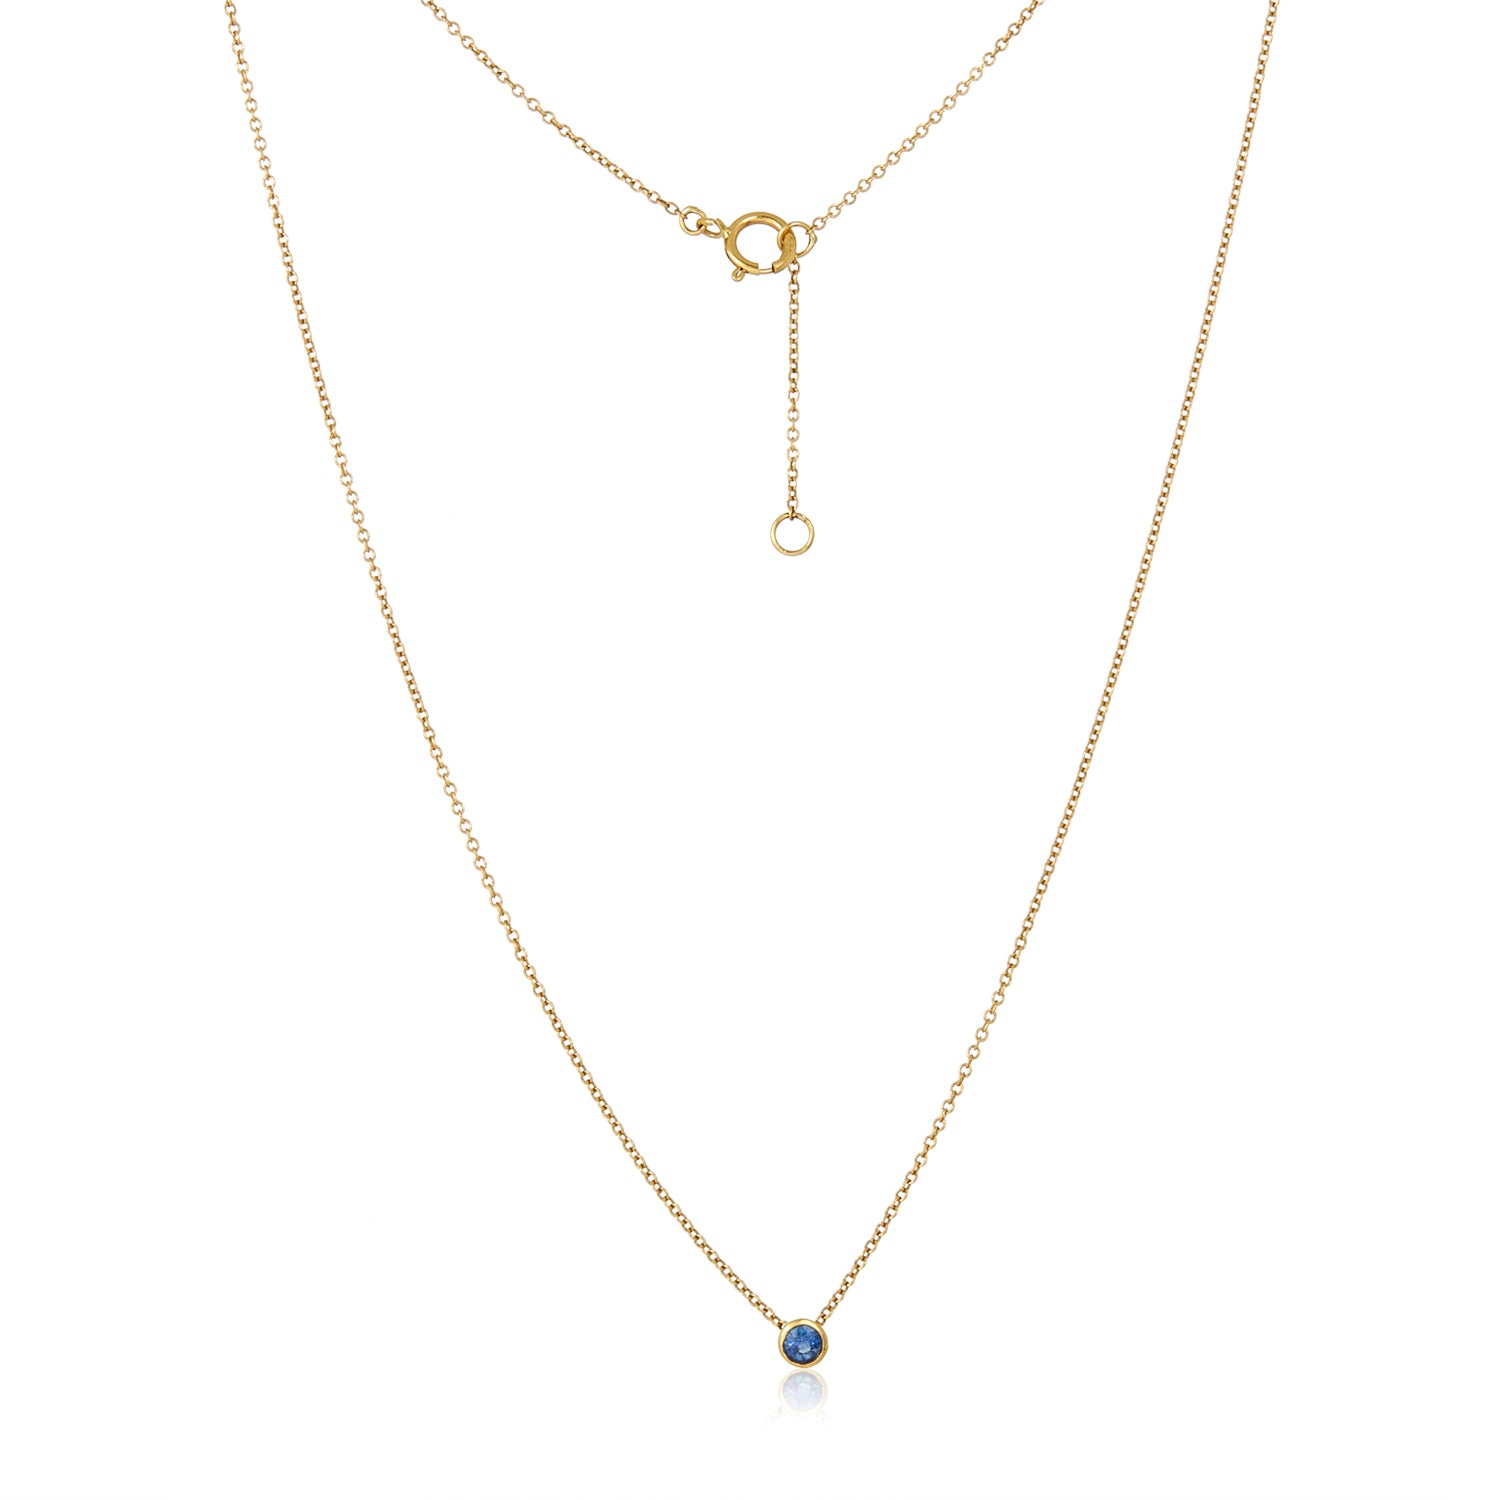 Petite Sapphire Necklace in 14k